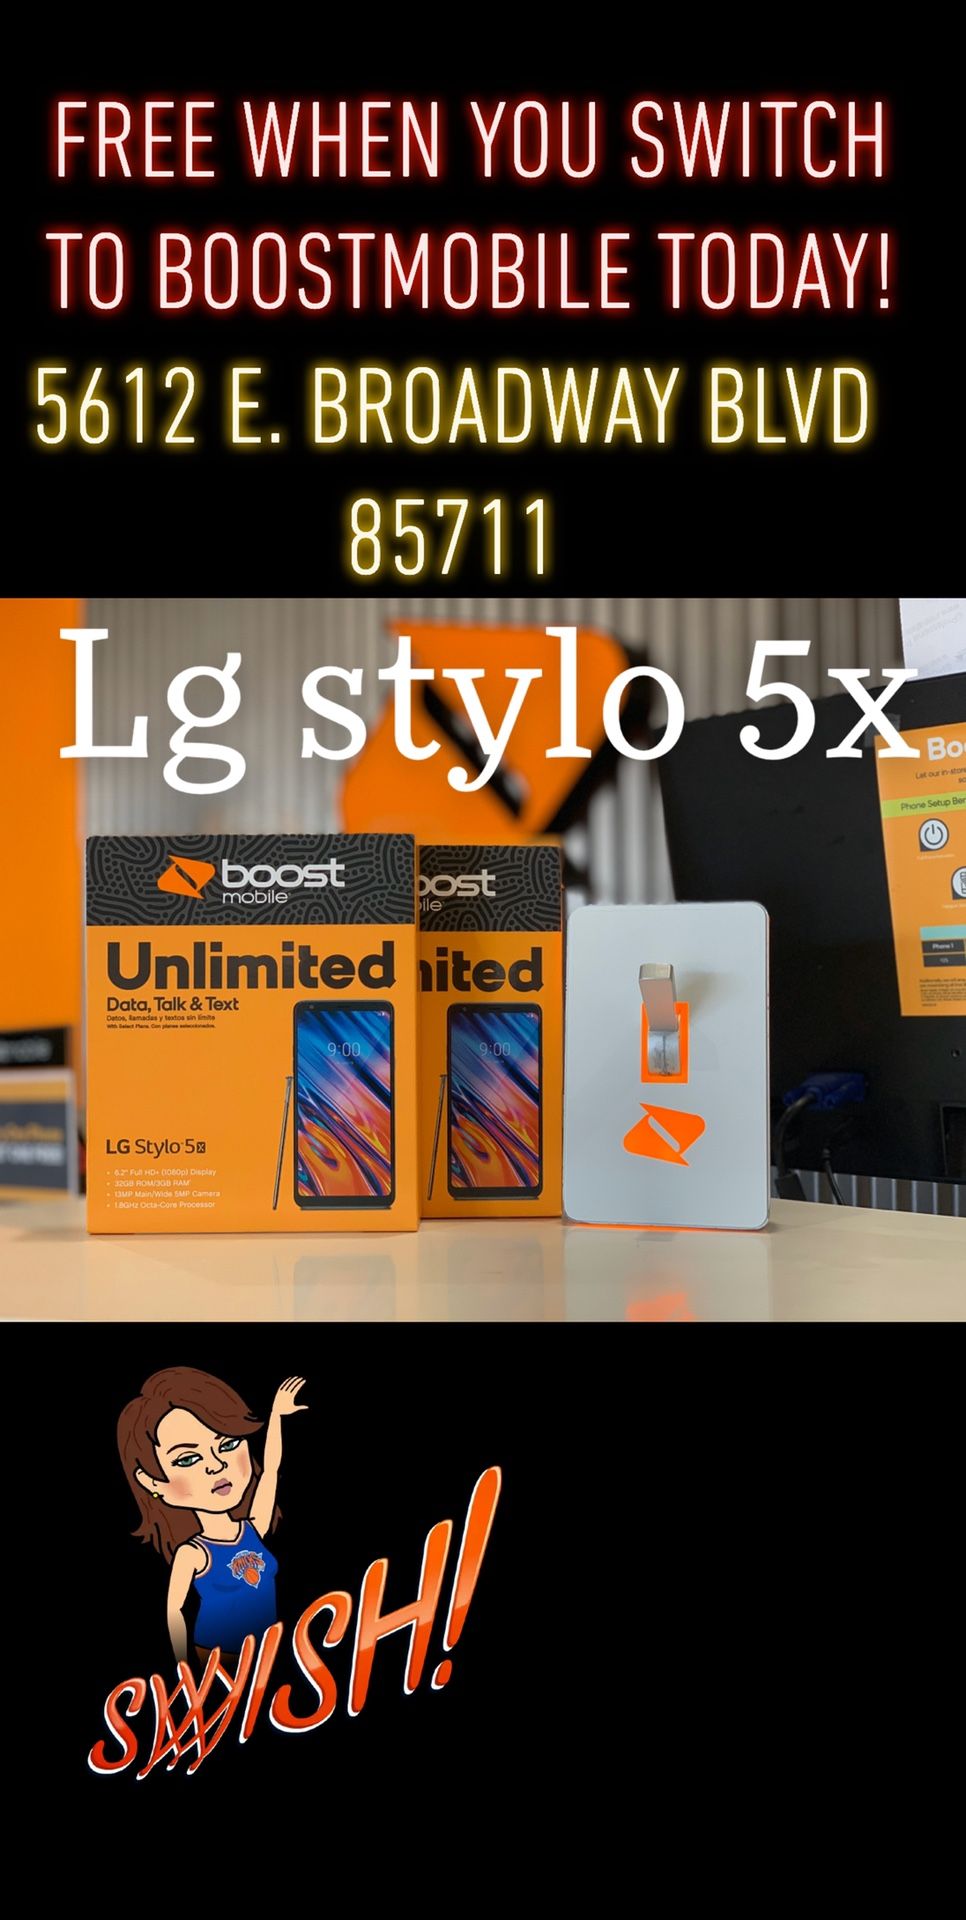 Lg Stylo 5X Free when you switch to BoostMobile today! 5612 E Broadway Blvd 85711